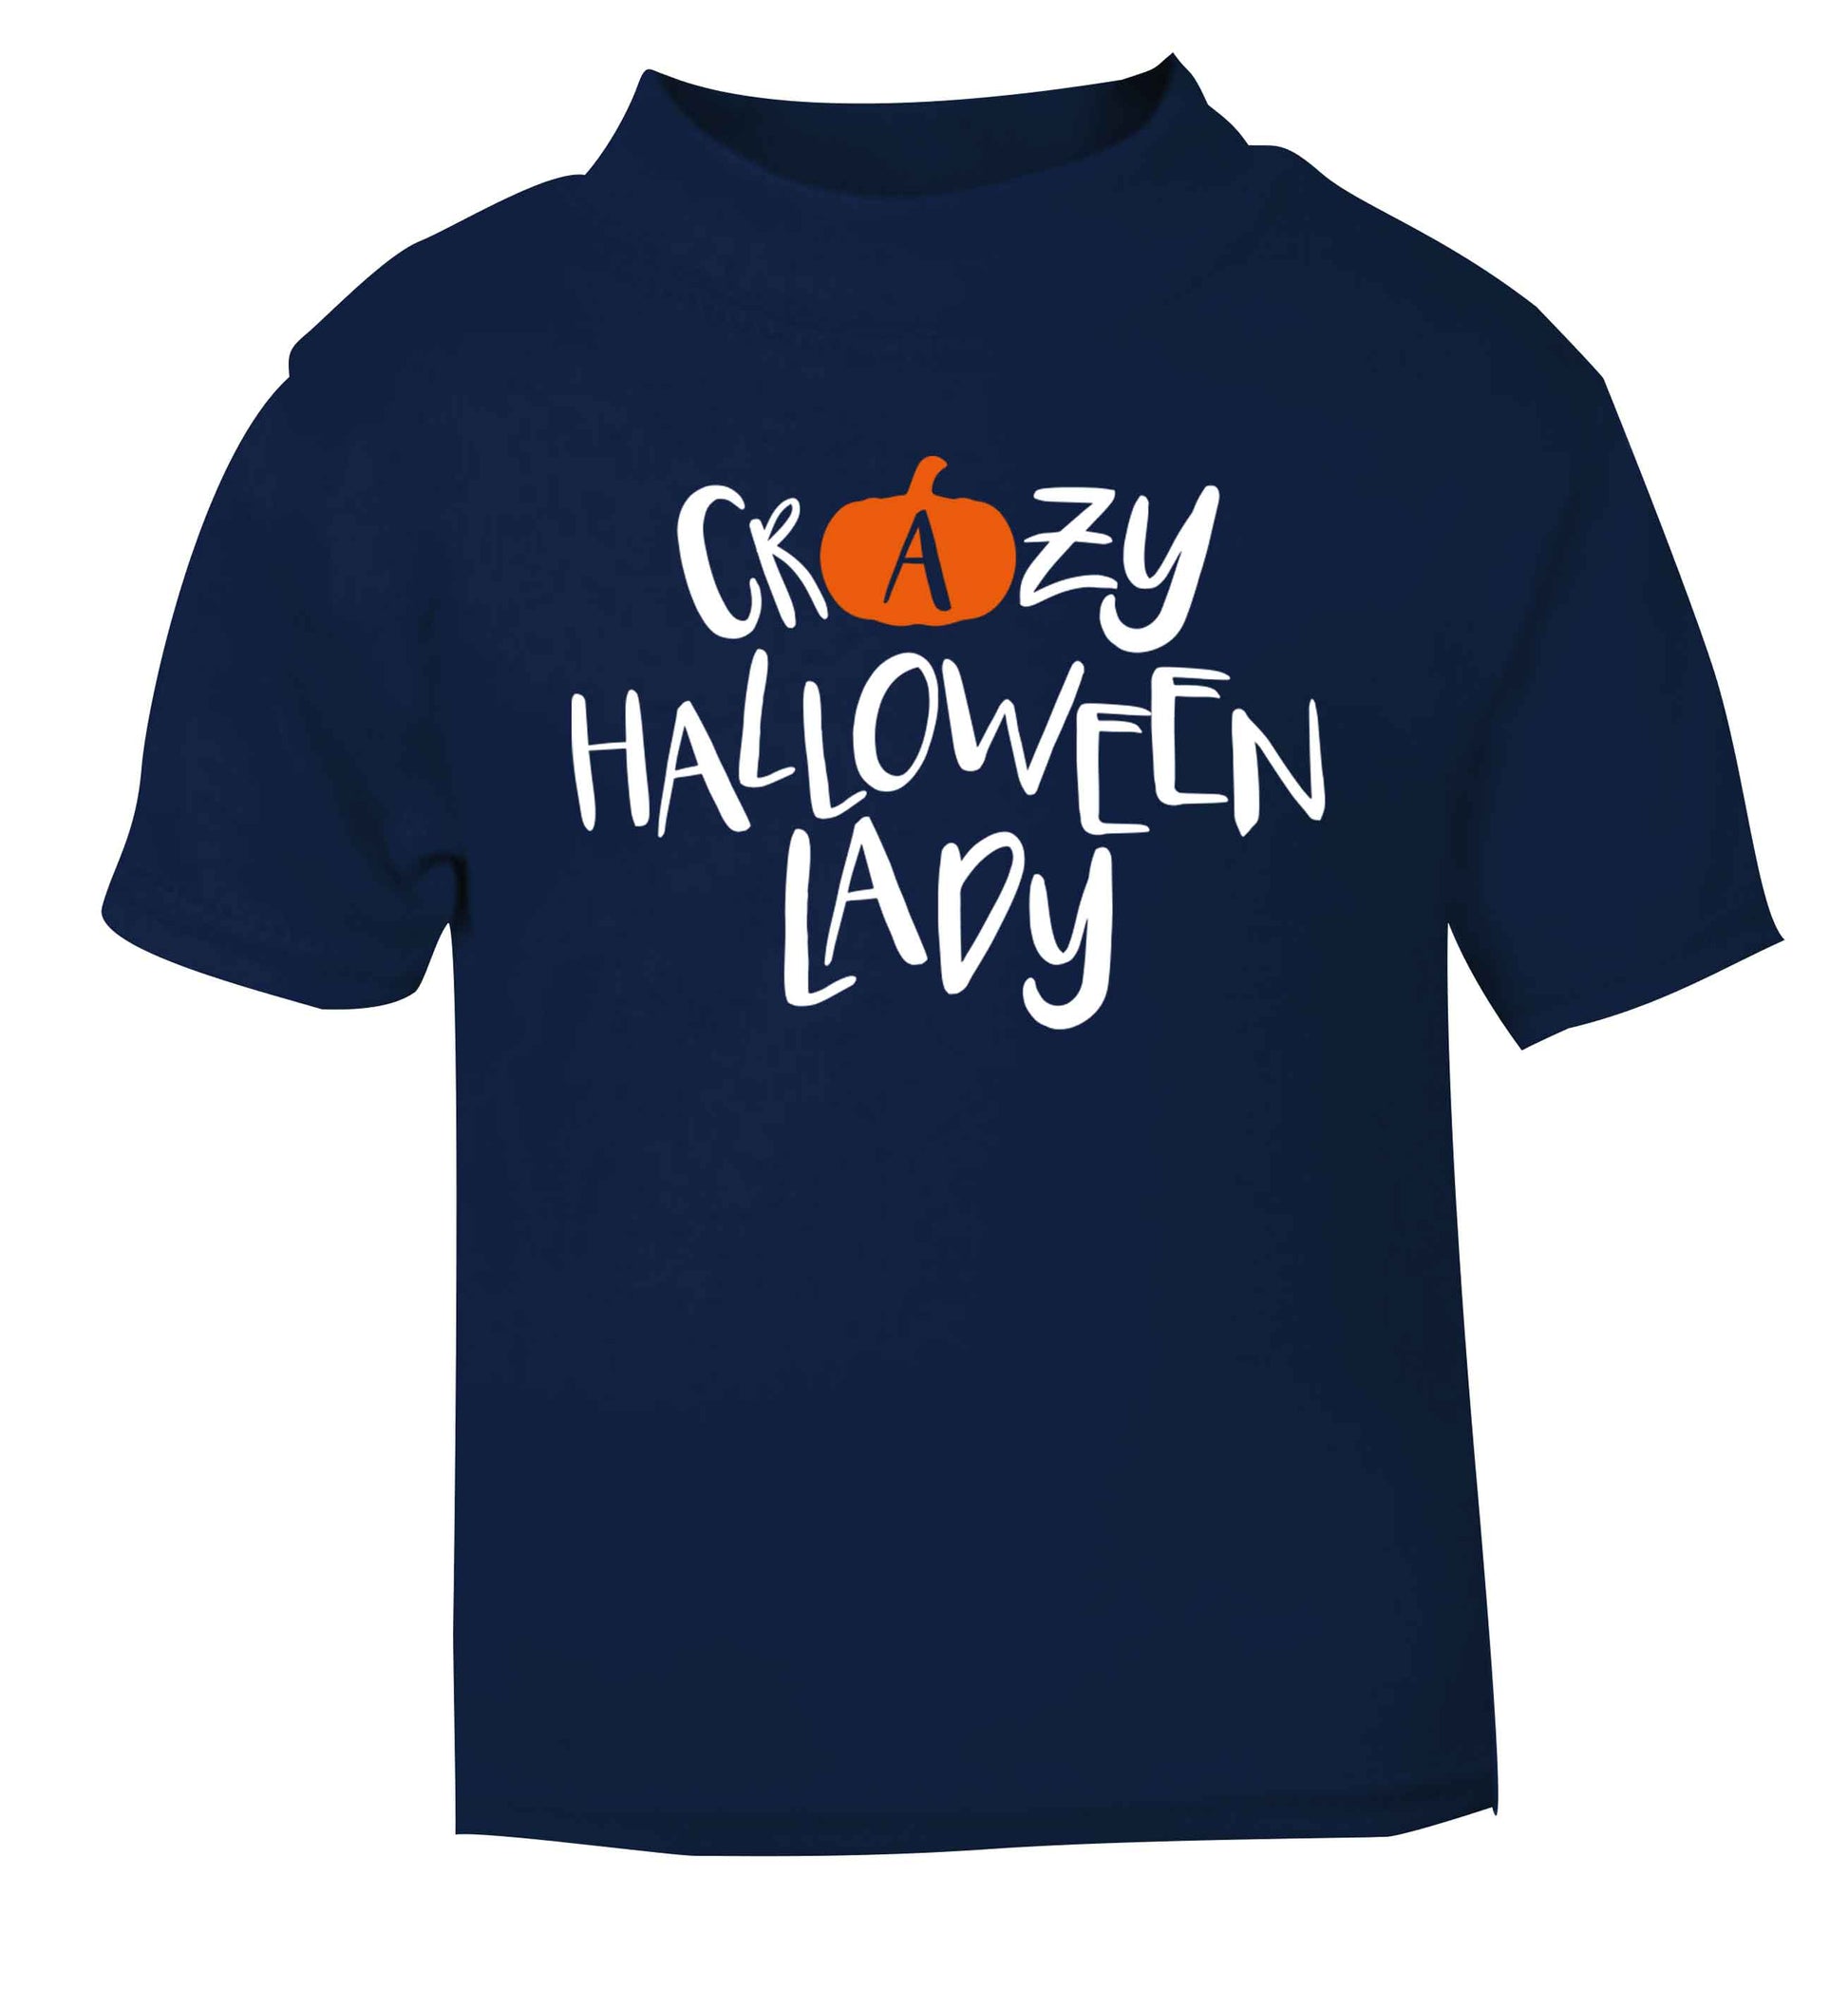 Crazy halloween lady navy baby toddler Tshirt 2 Years